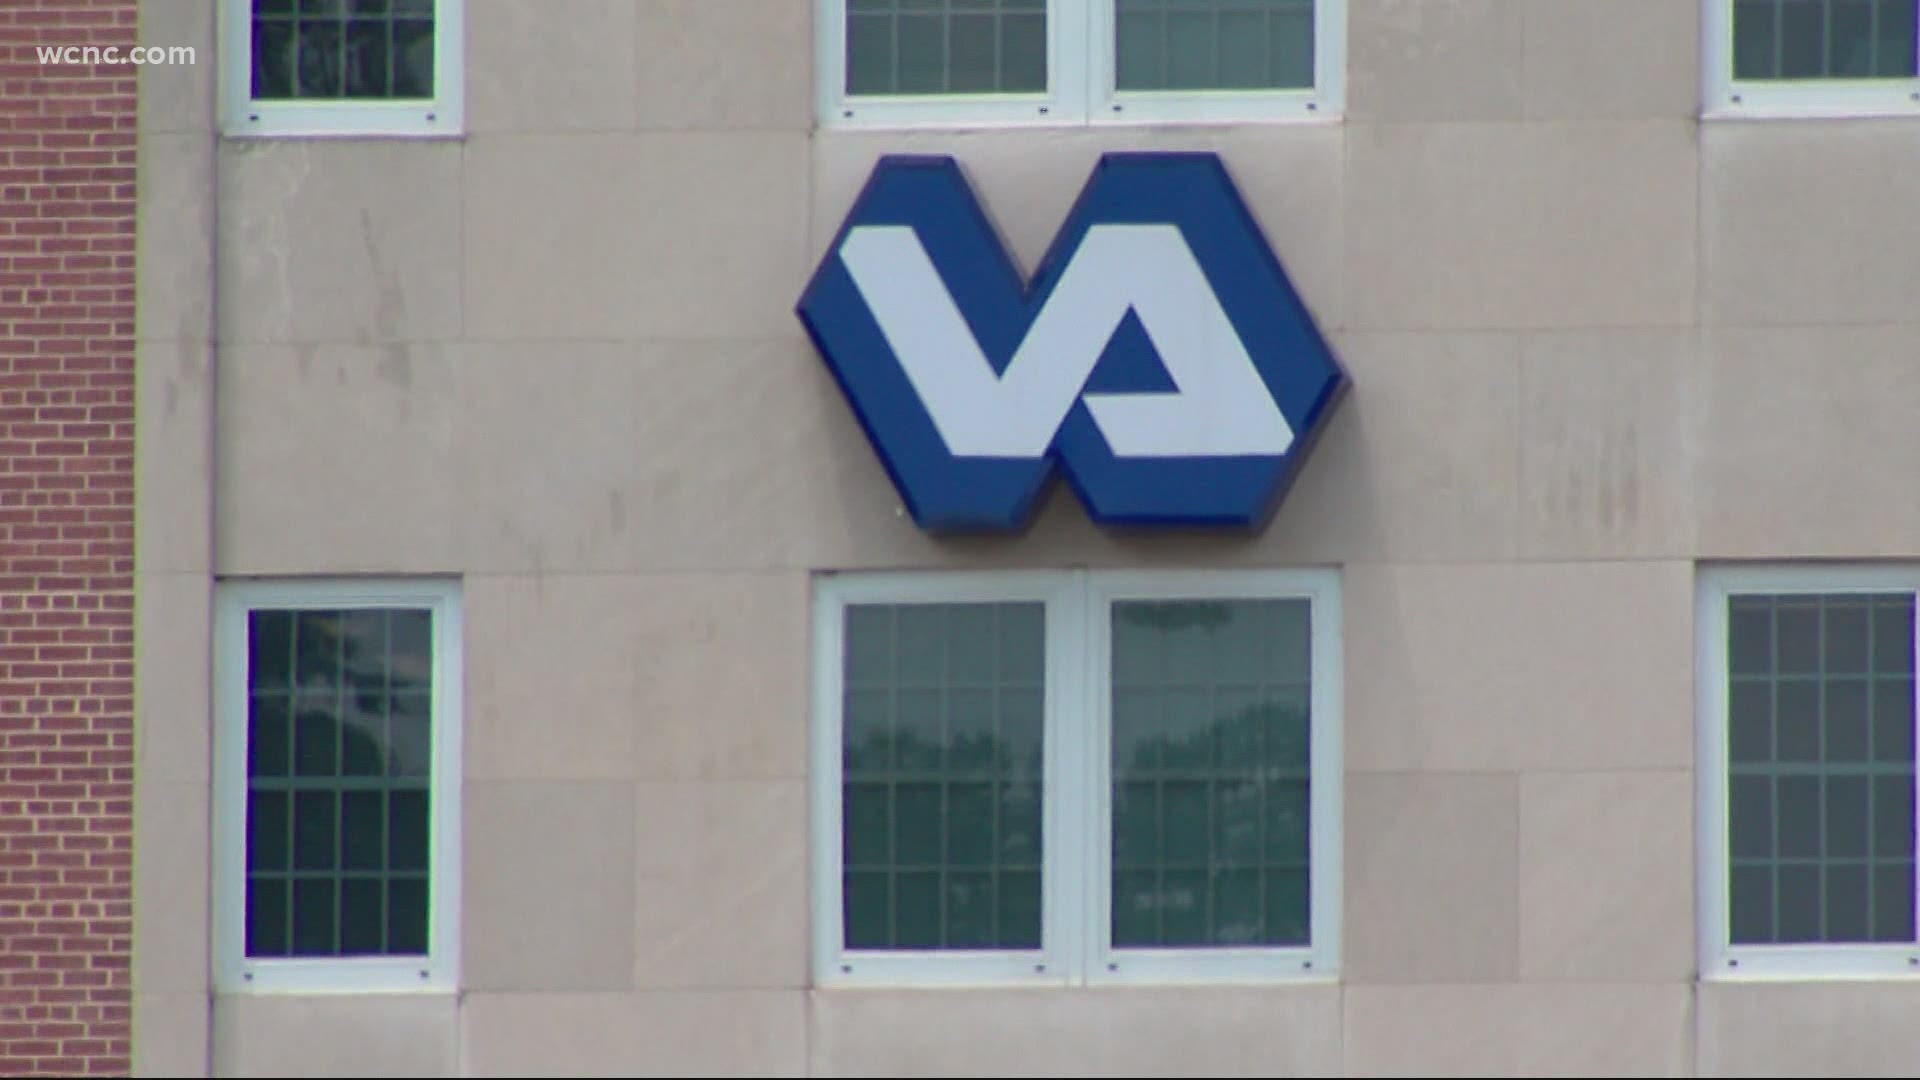 The Salisbury VA plans to vaccinate up to 1,000 veterans over two days as the state's rollout plan impacts more patients.